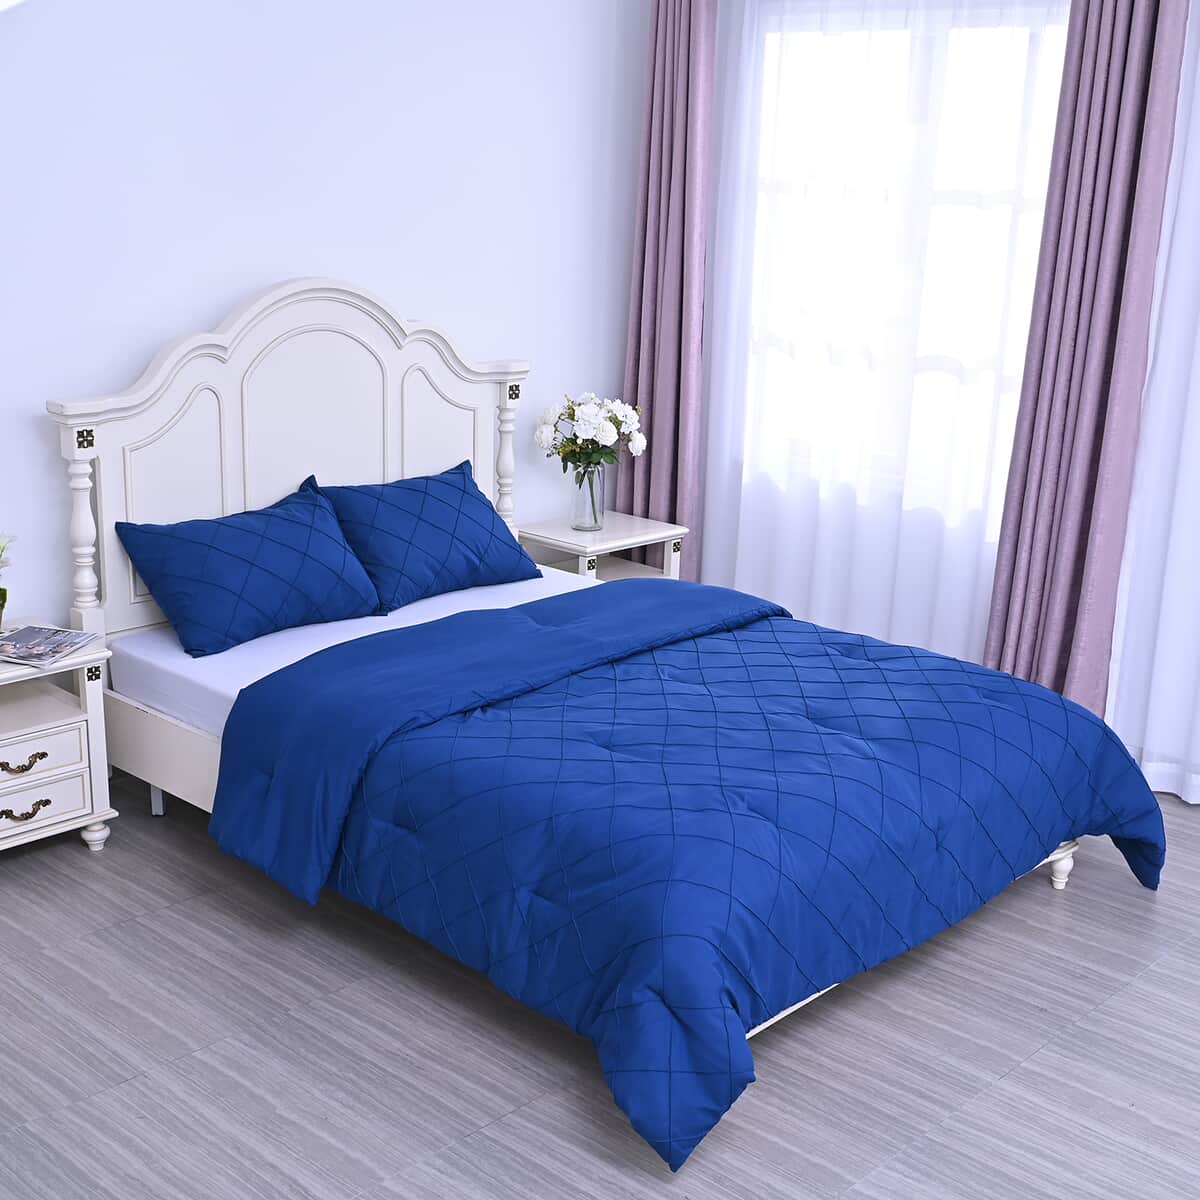 Homesmart Blue Solid Microfiber Quilt and Set of 2 Shams - Queen image number 0